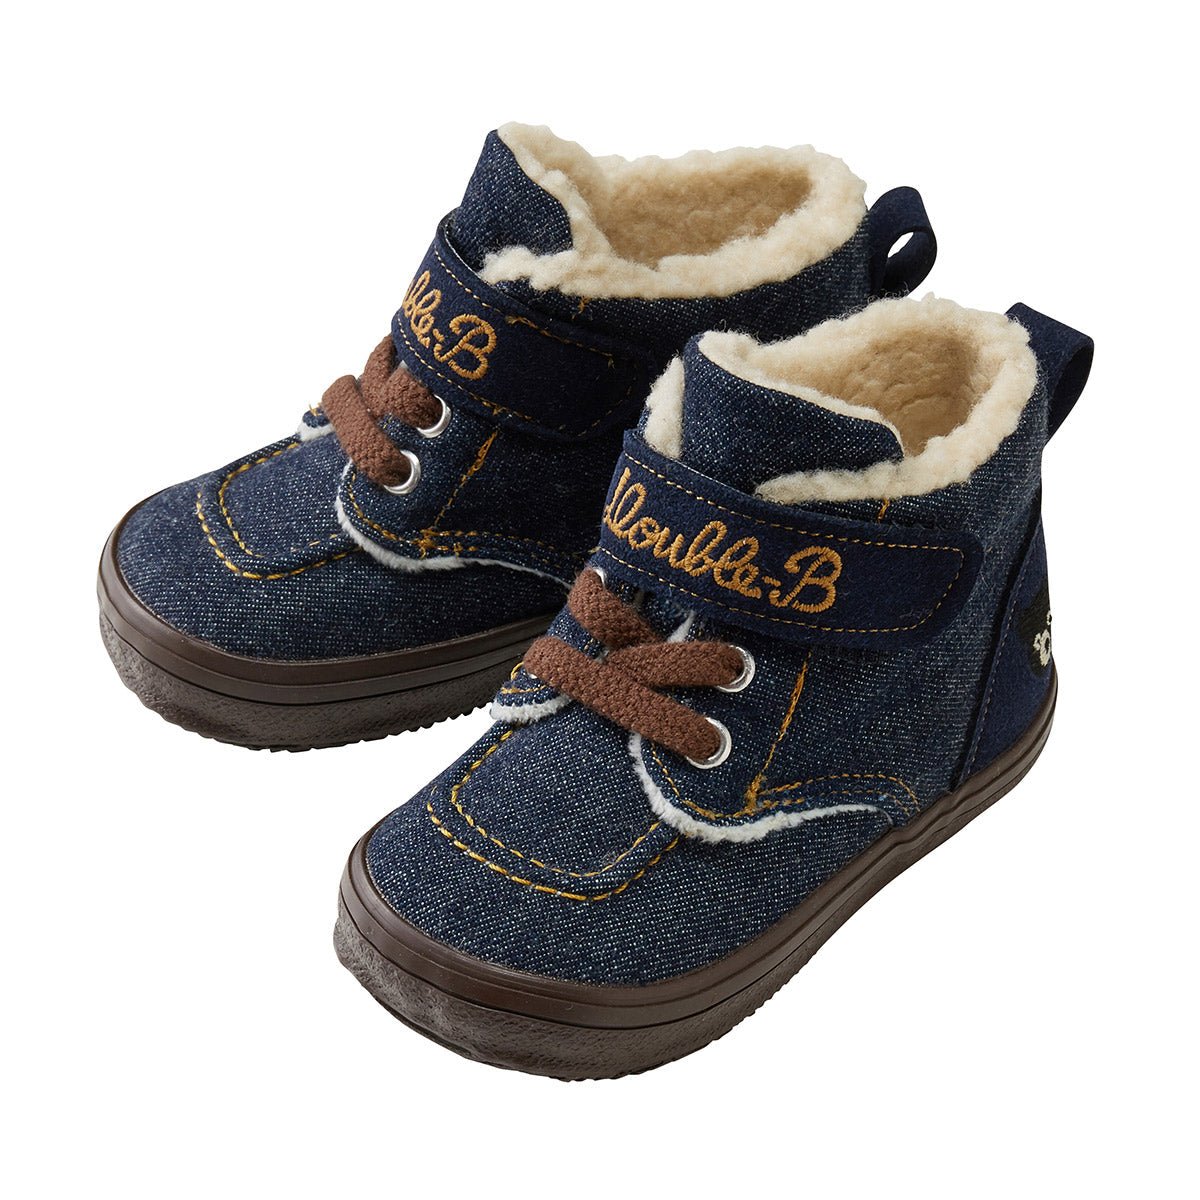 DOUBLE_B Winter Shoes - 63-9304-261-33-13